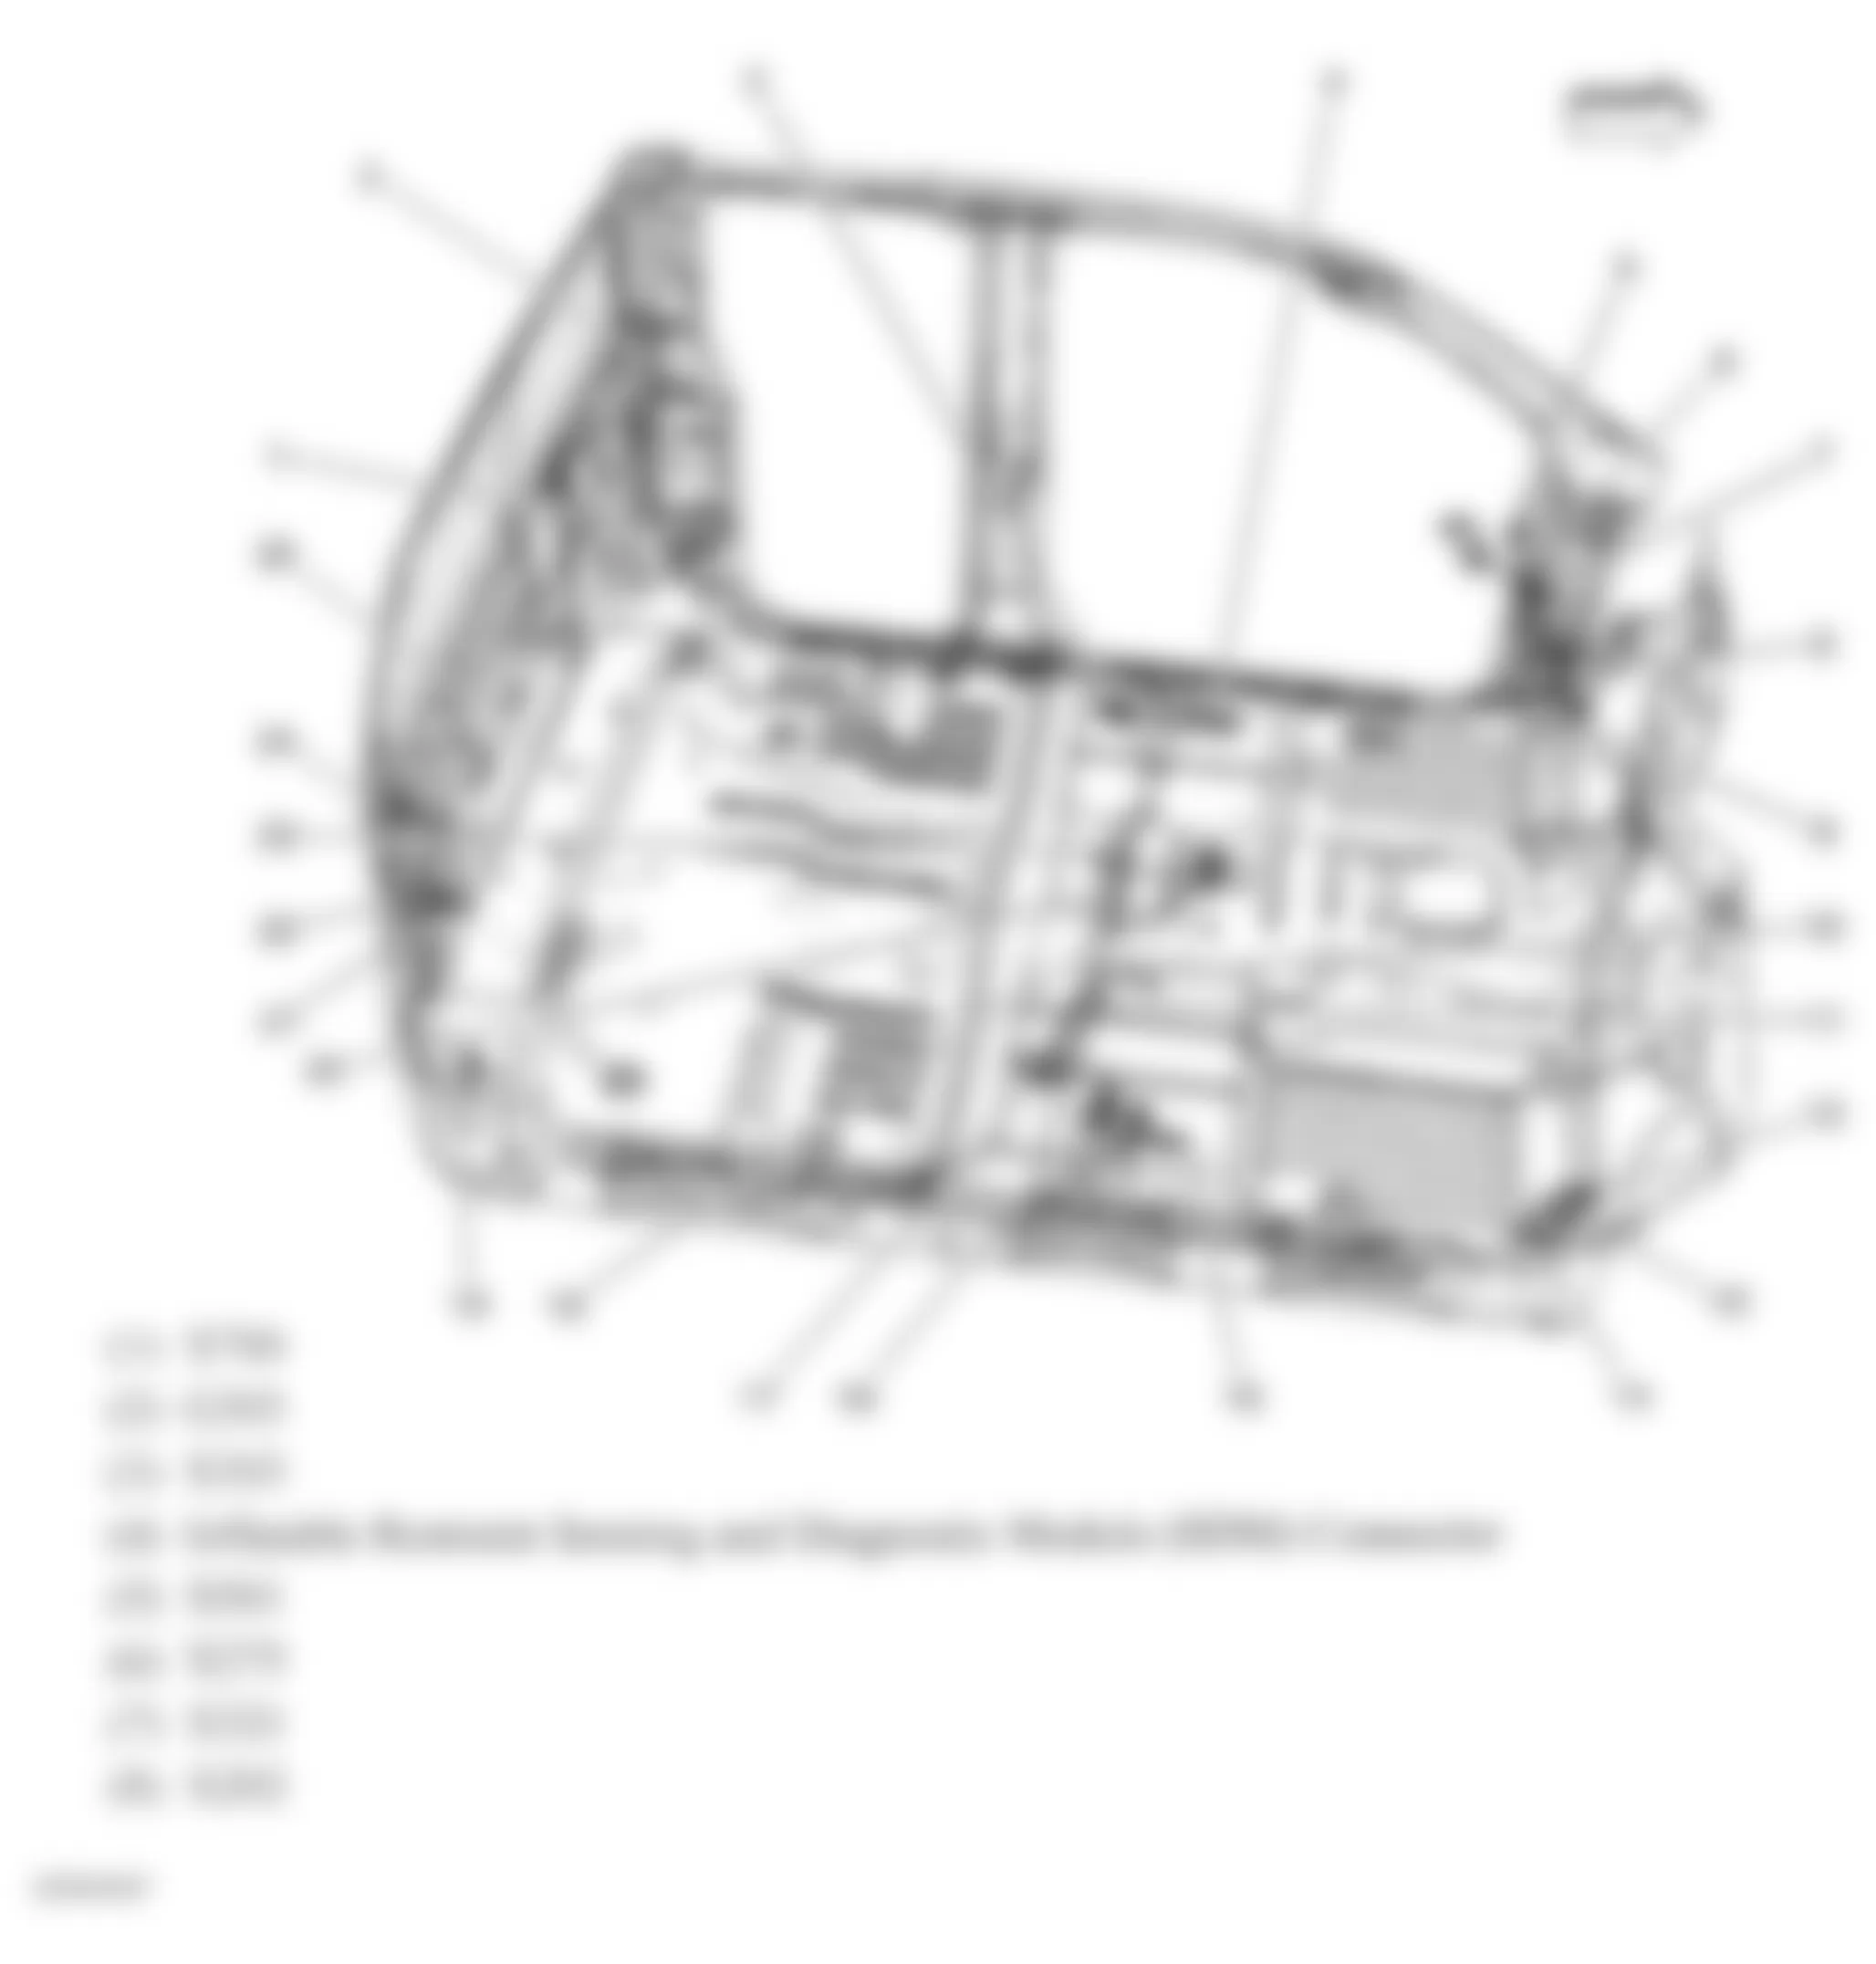 GMC Sierra 3500 HD 2009 - Component Locations -  Passenger Compartment (Extended Cab) (1 Of 2)